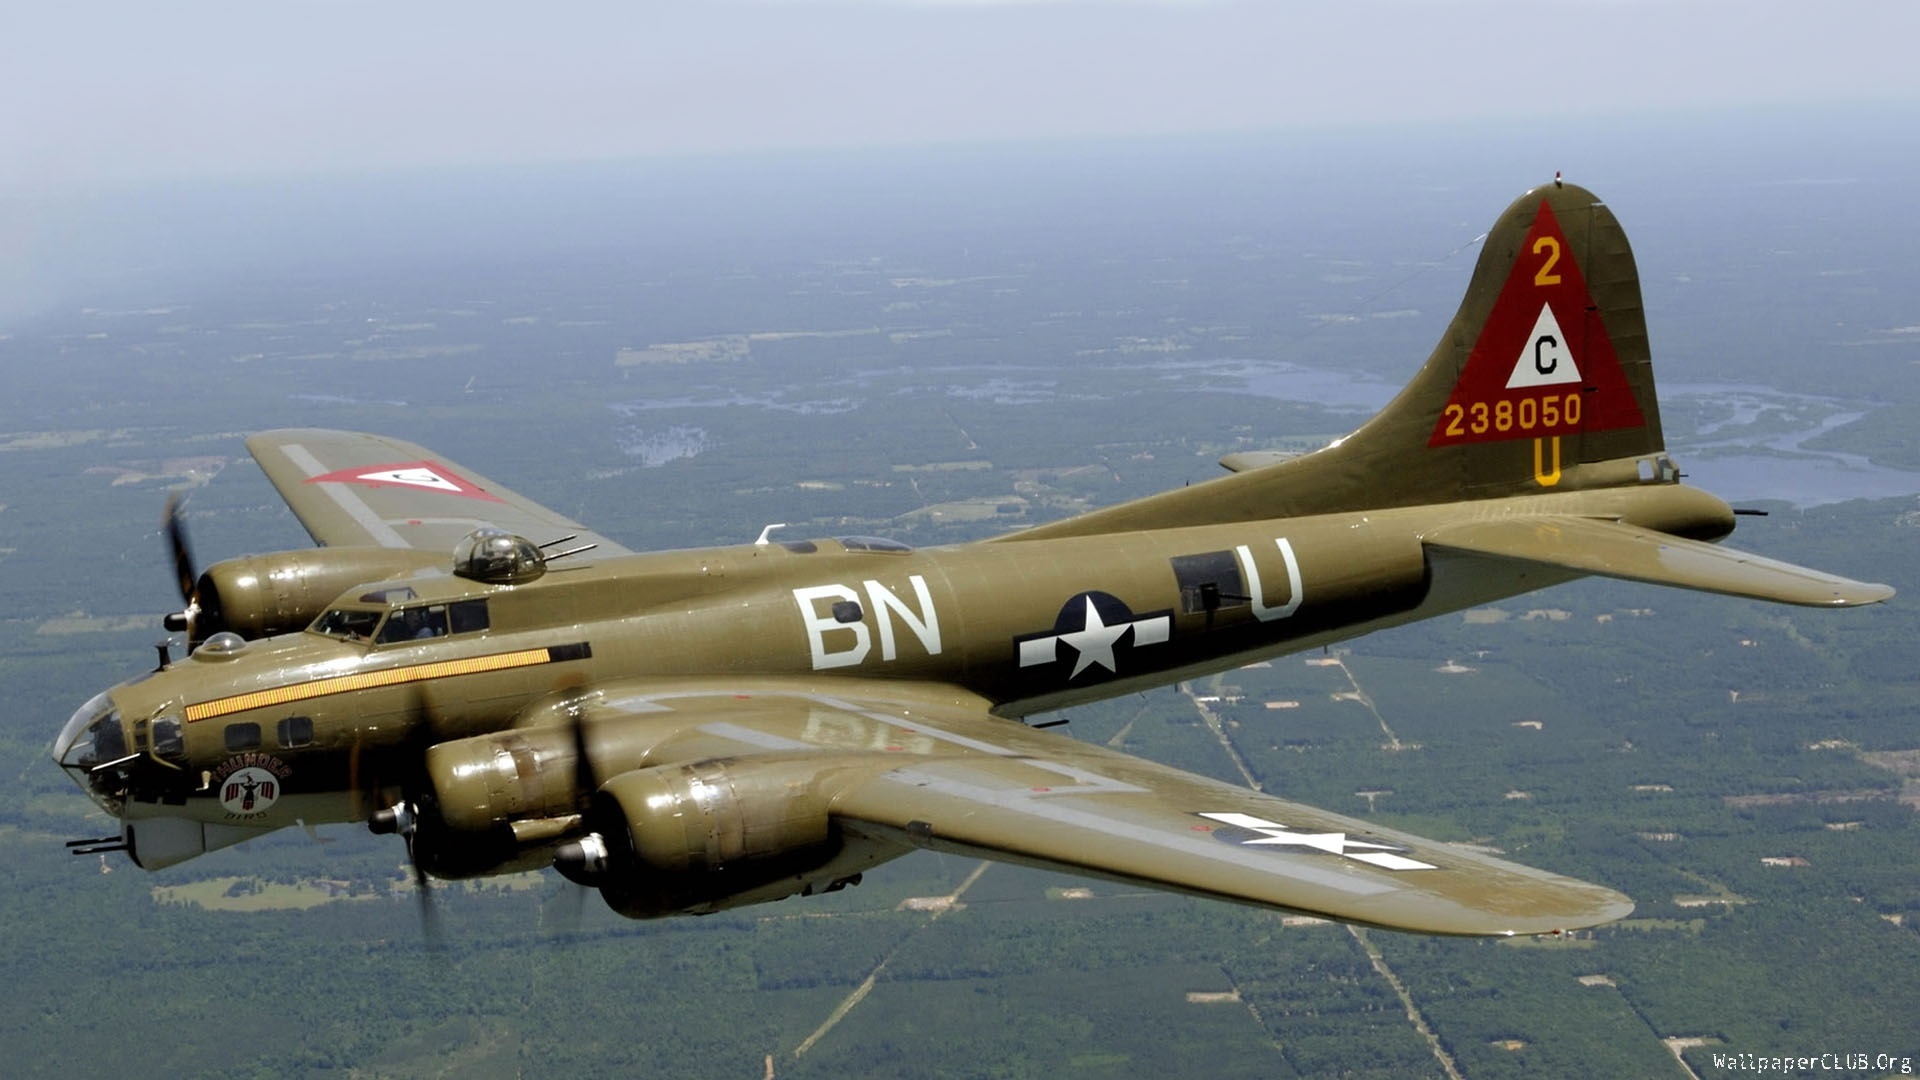 military, boeing b 17 flying fortress, air force, aircraft, airplane, bombers